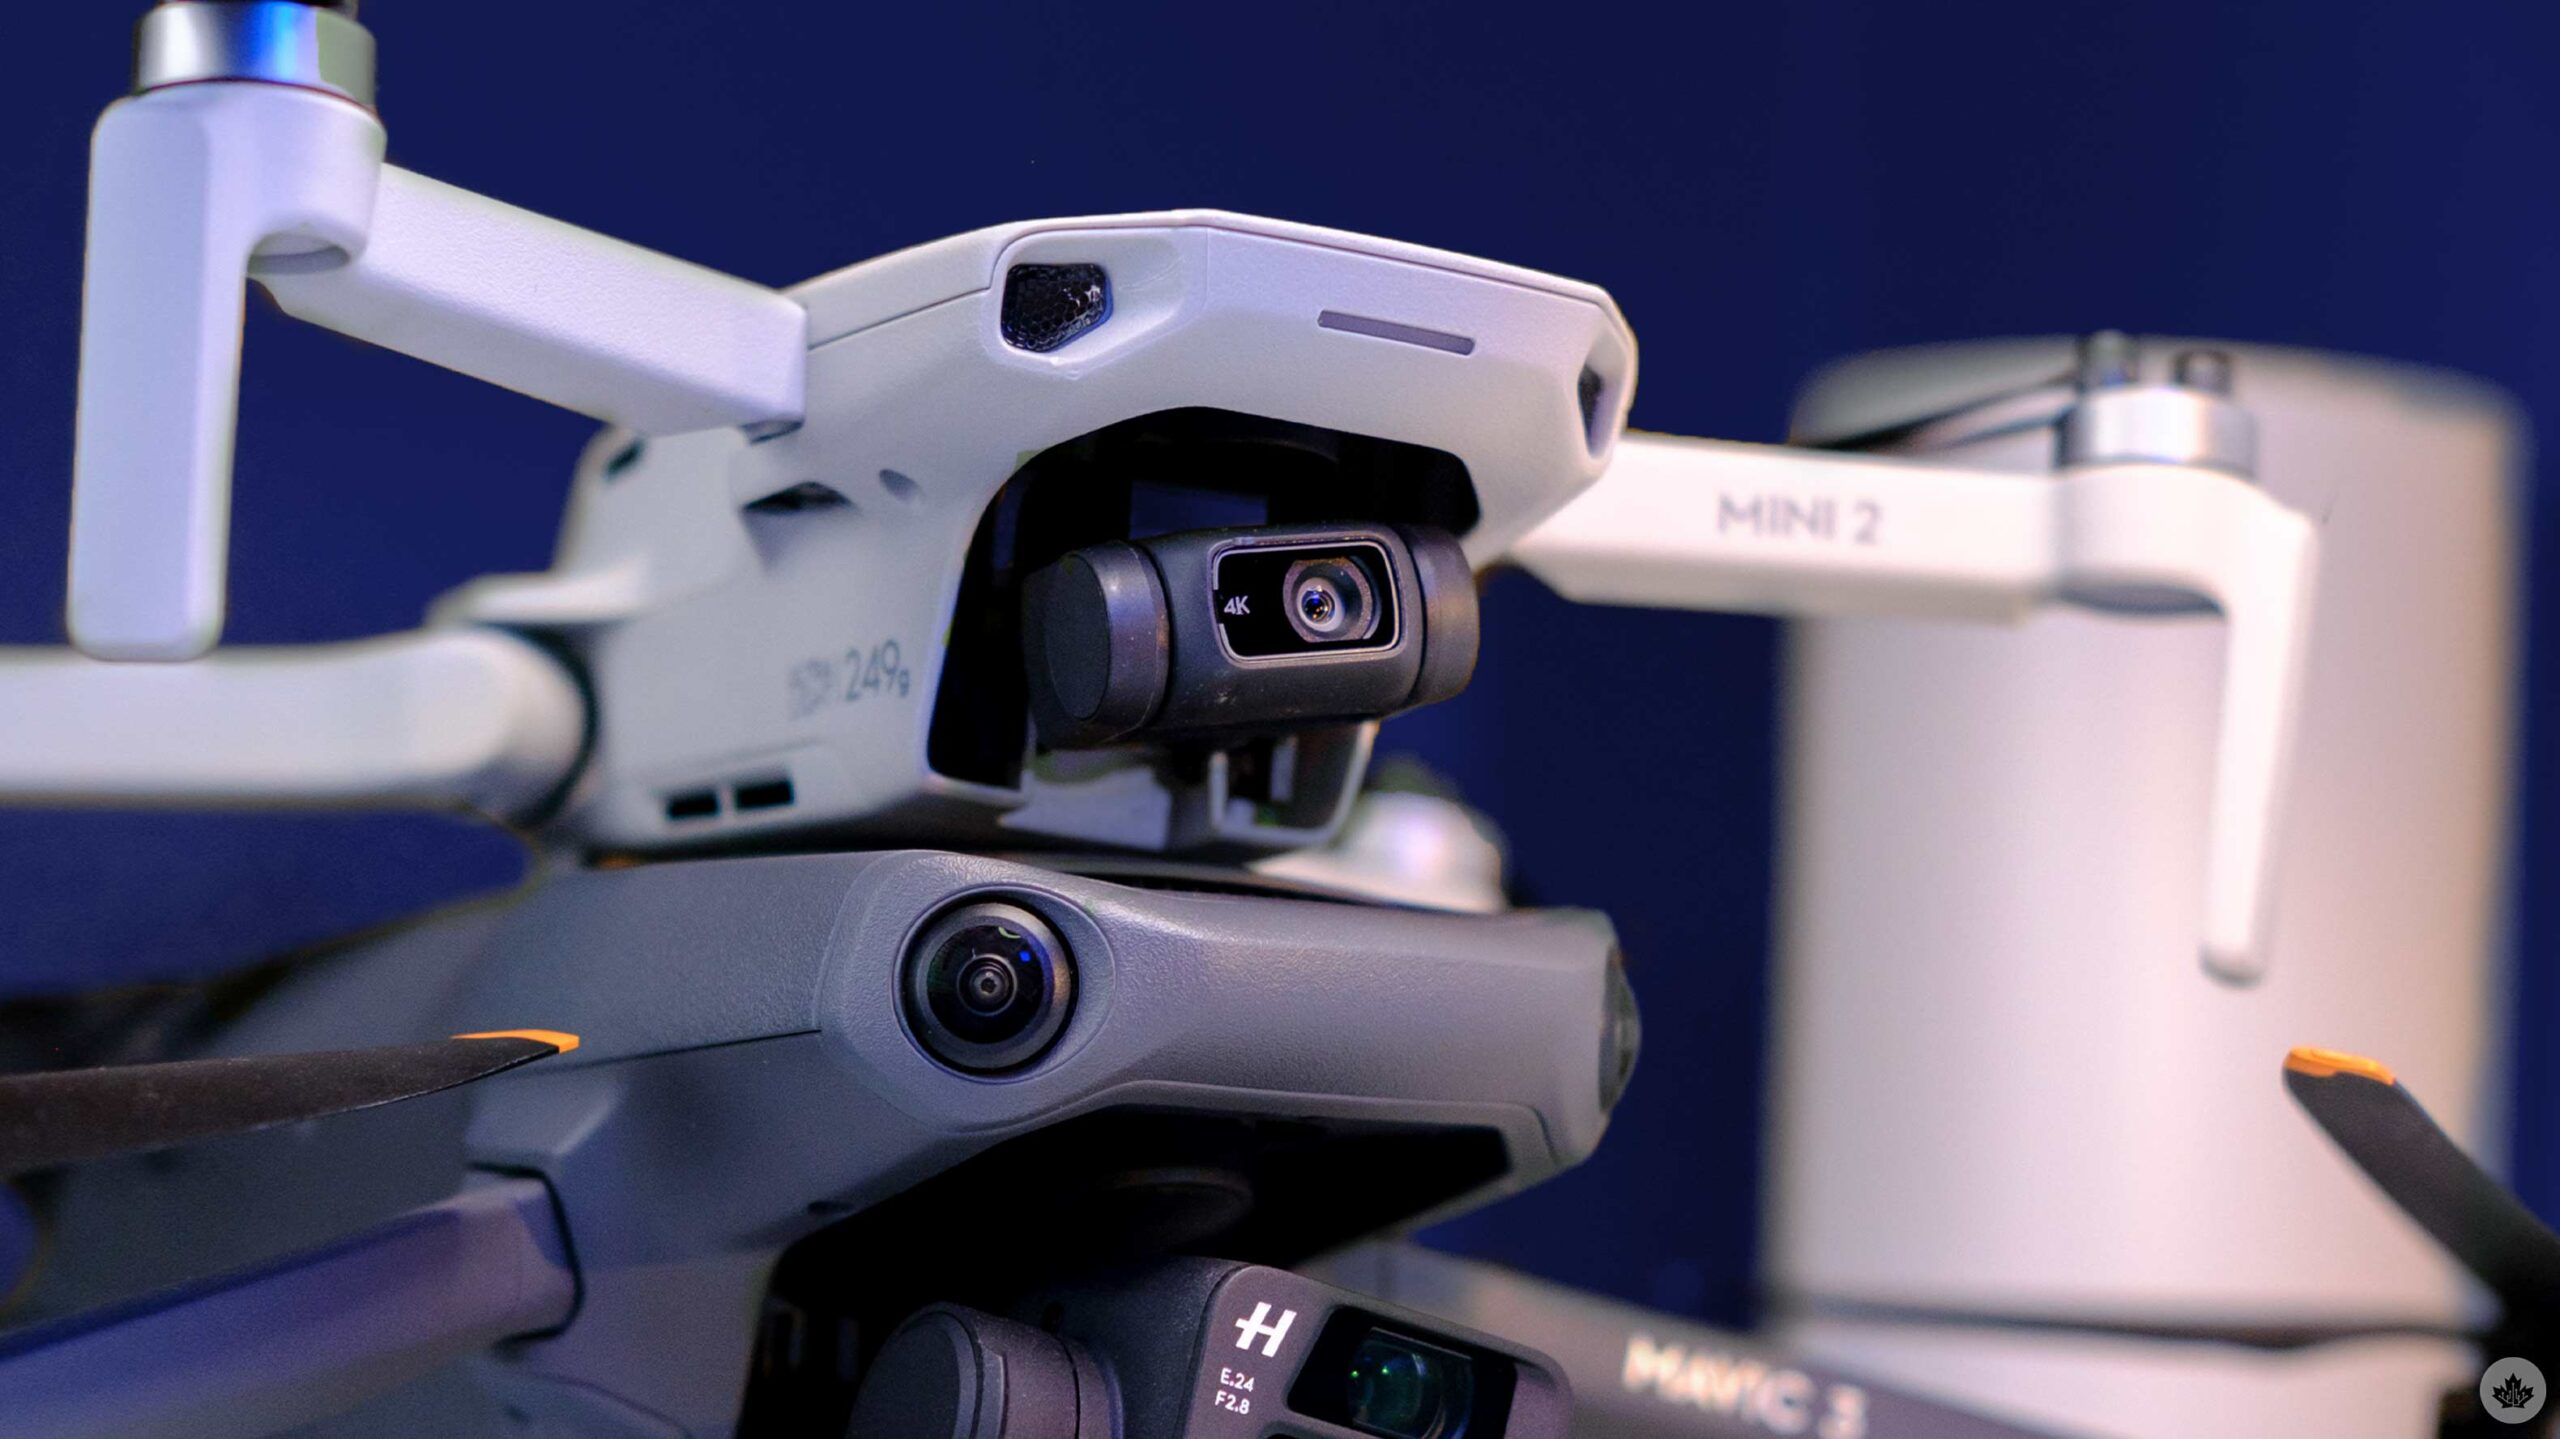 DJI’s next mini drone may include obstacle avoidance and a better camera